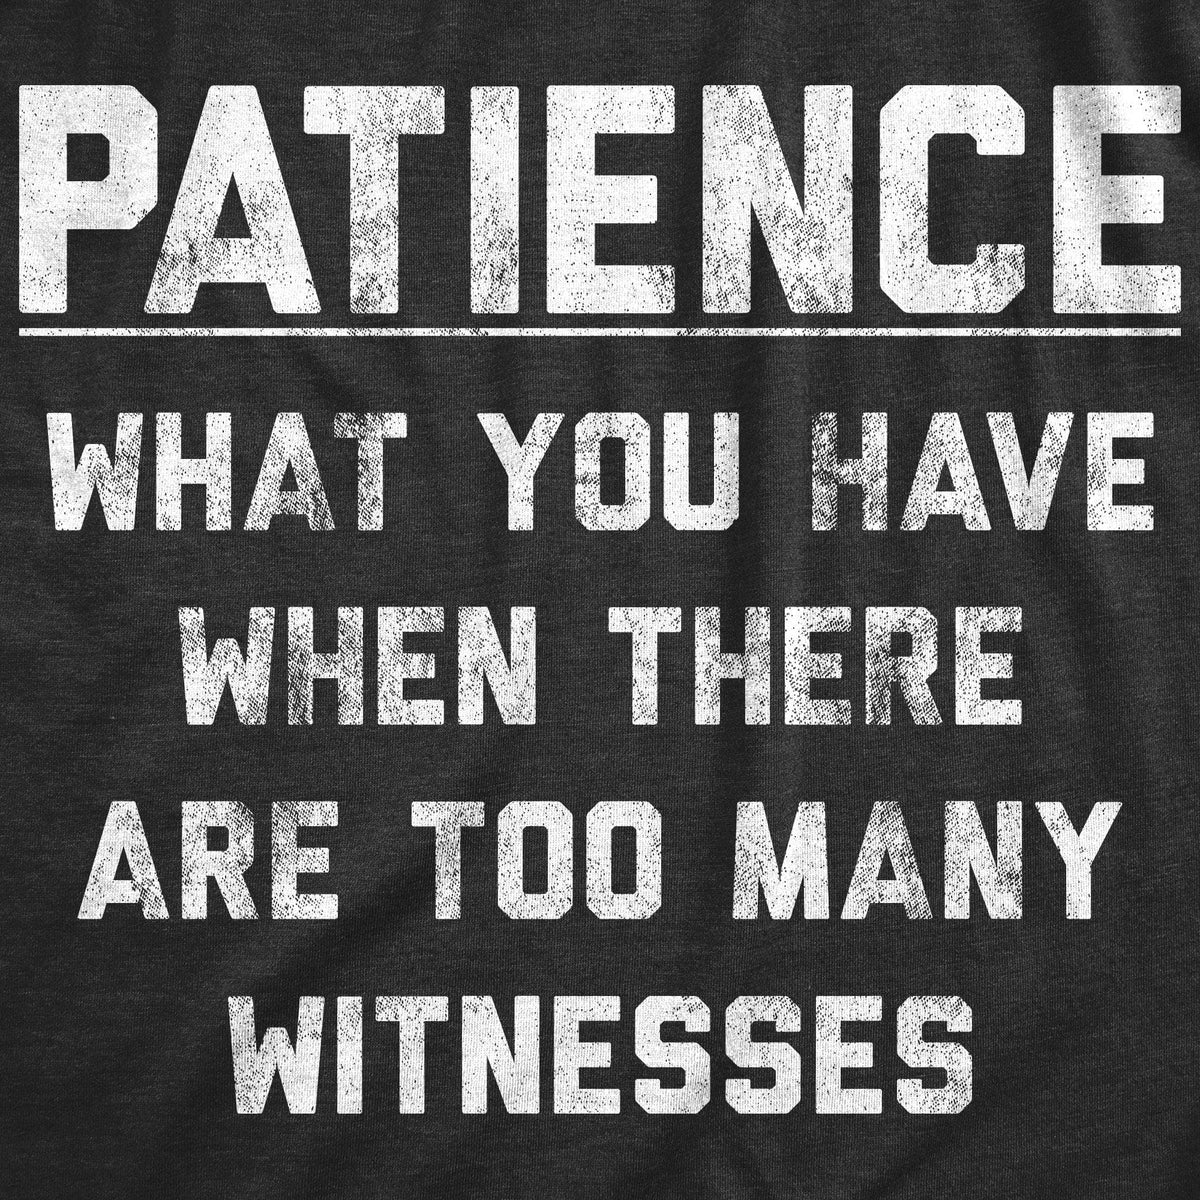 Patience What You Have When There Are Too Many Witnesses Men&#39;s Tshirt - Crazy Dog T-Shirts